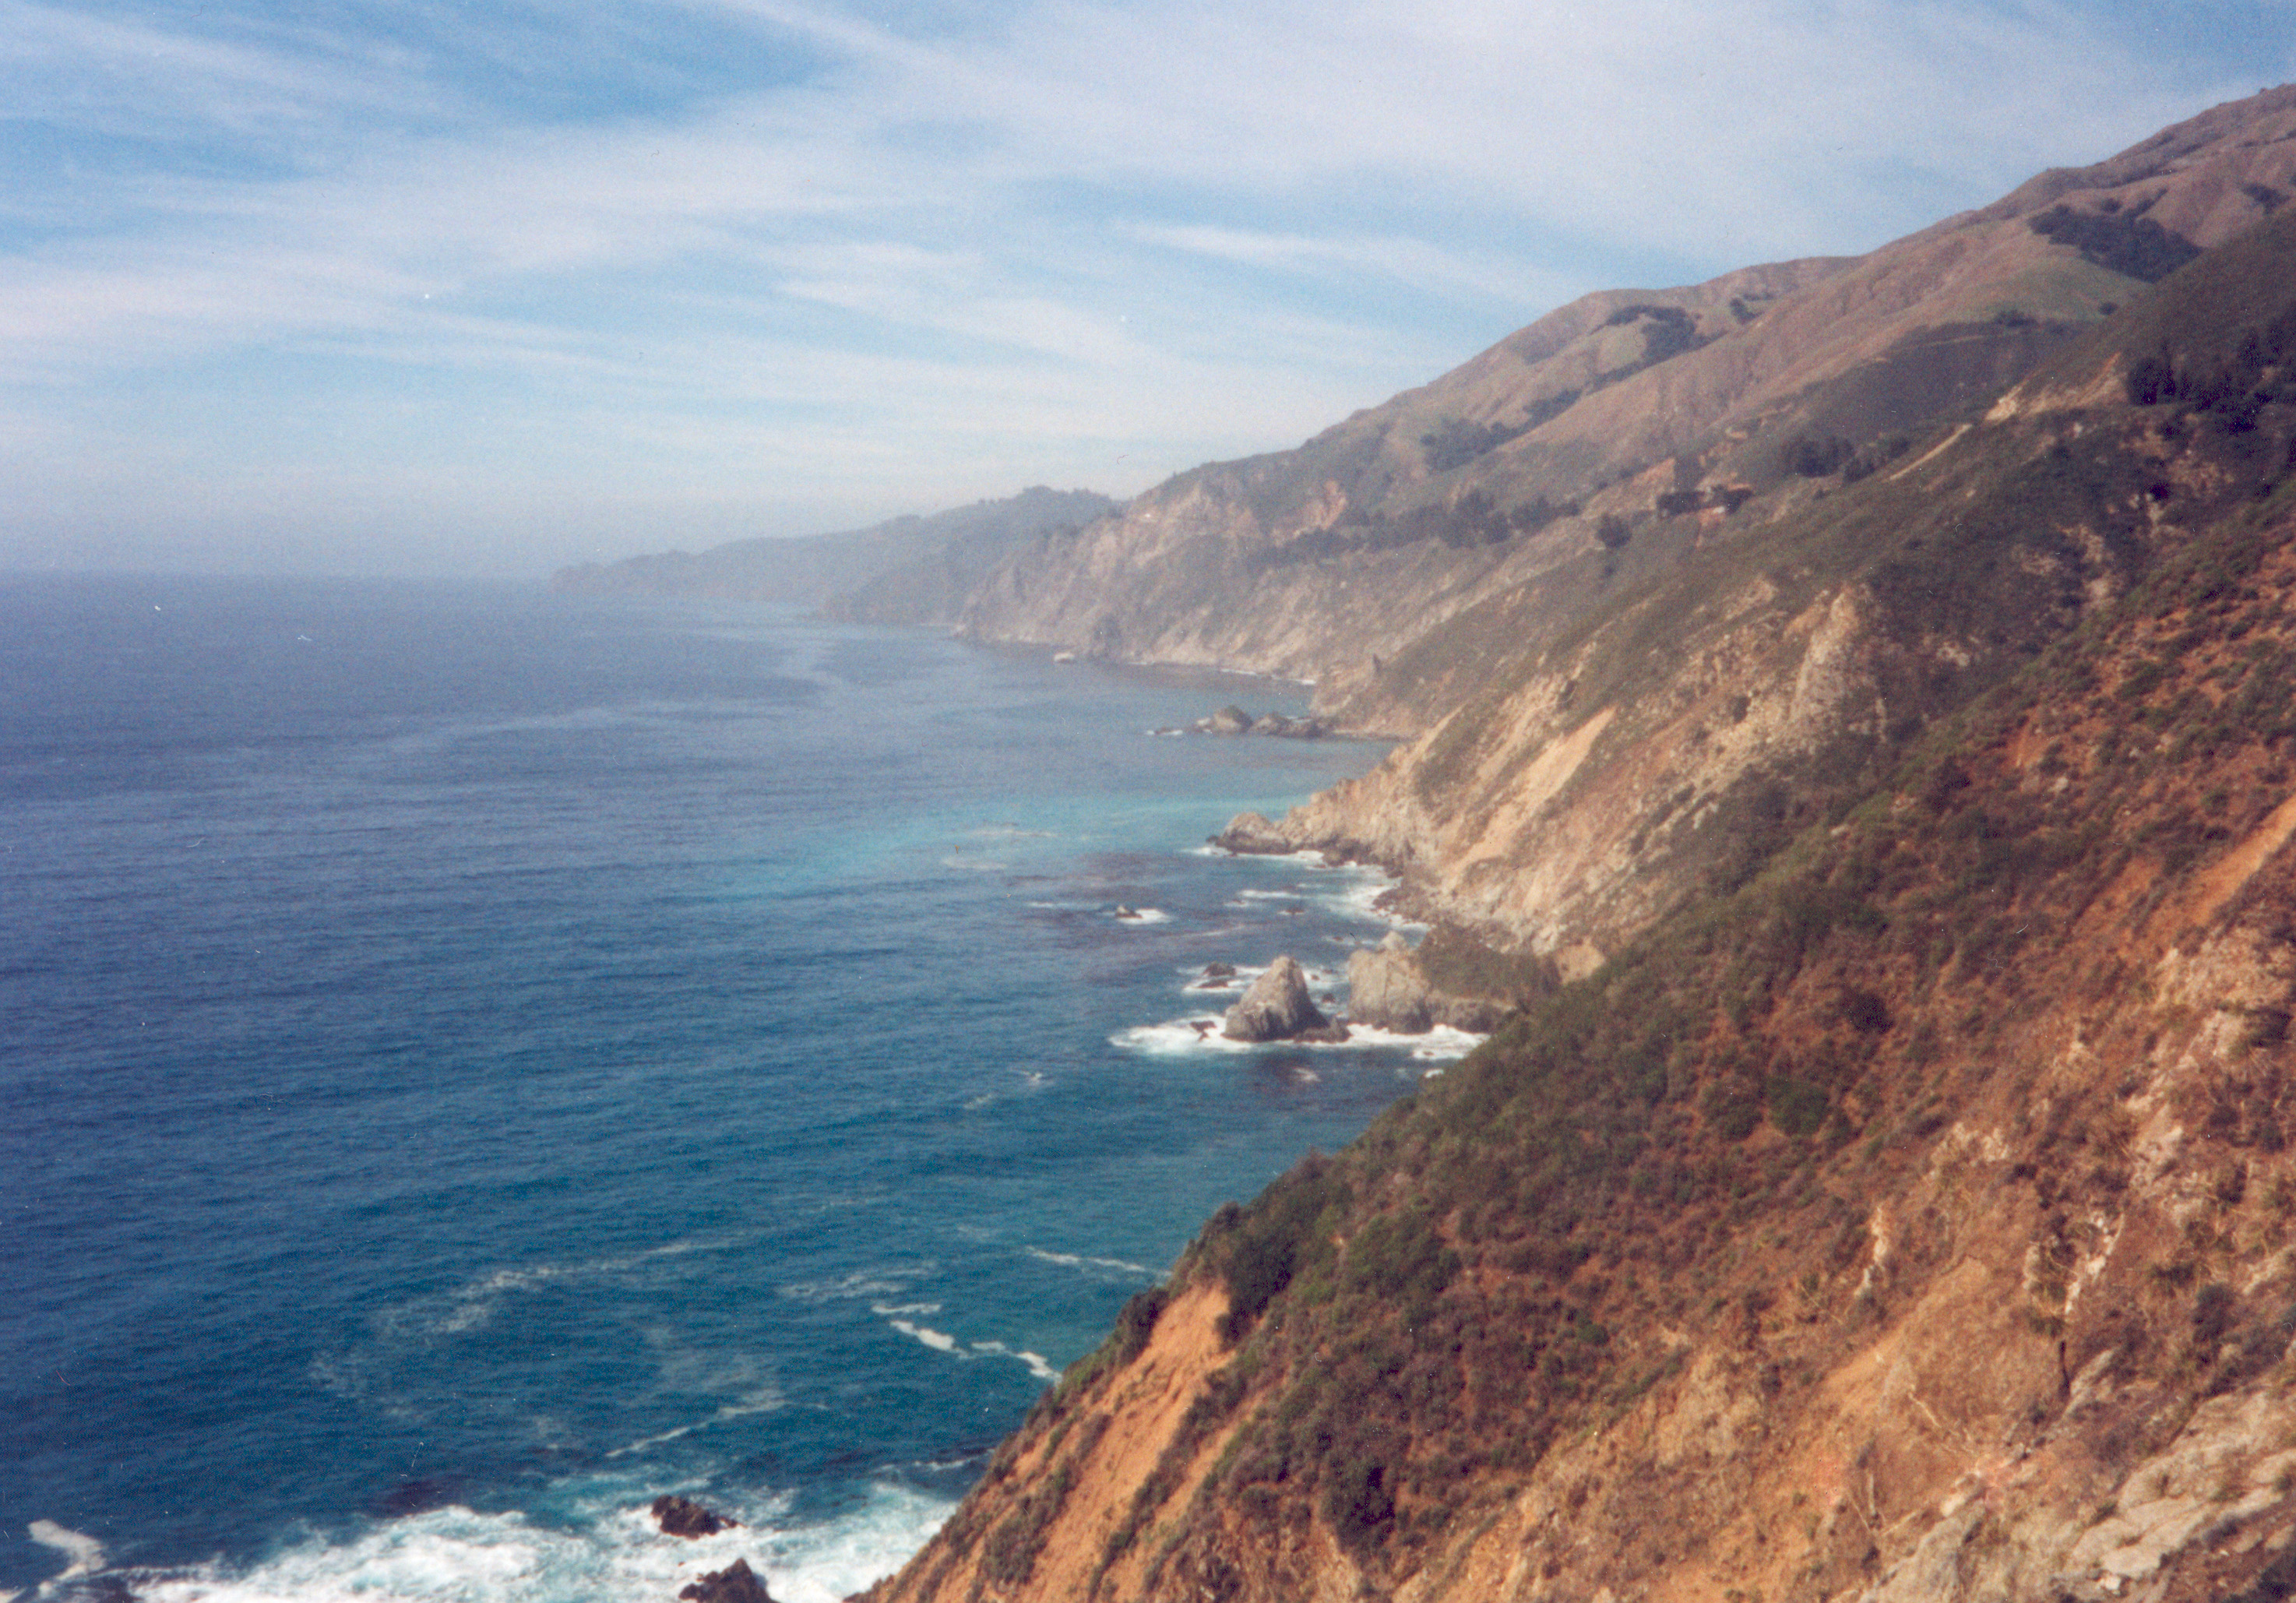 Route 1 - Big Sur Coast Highway - All Photos | America's Byways